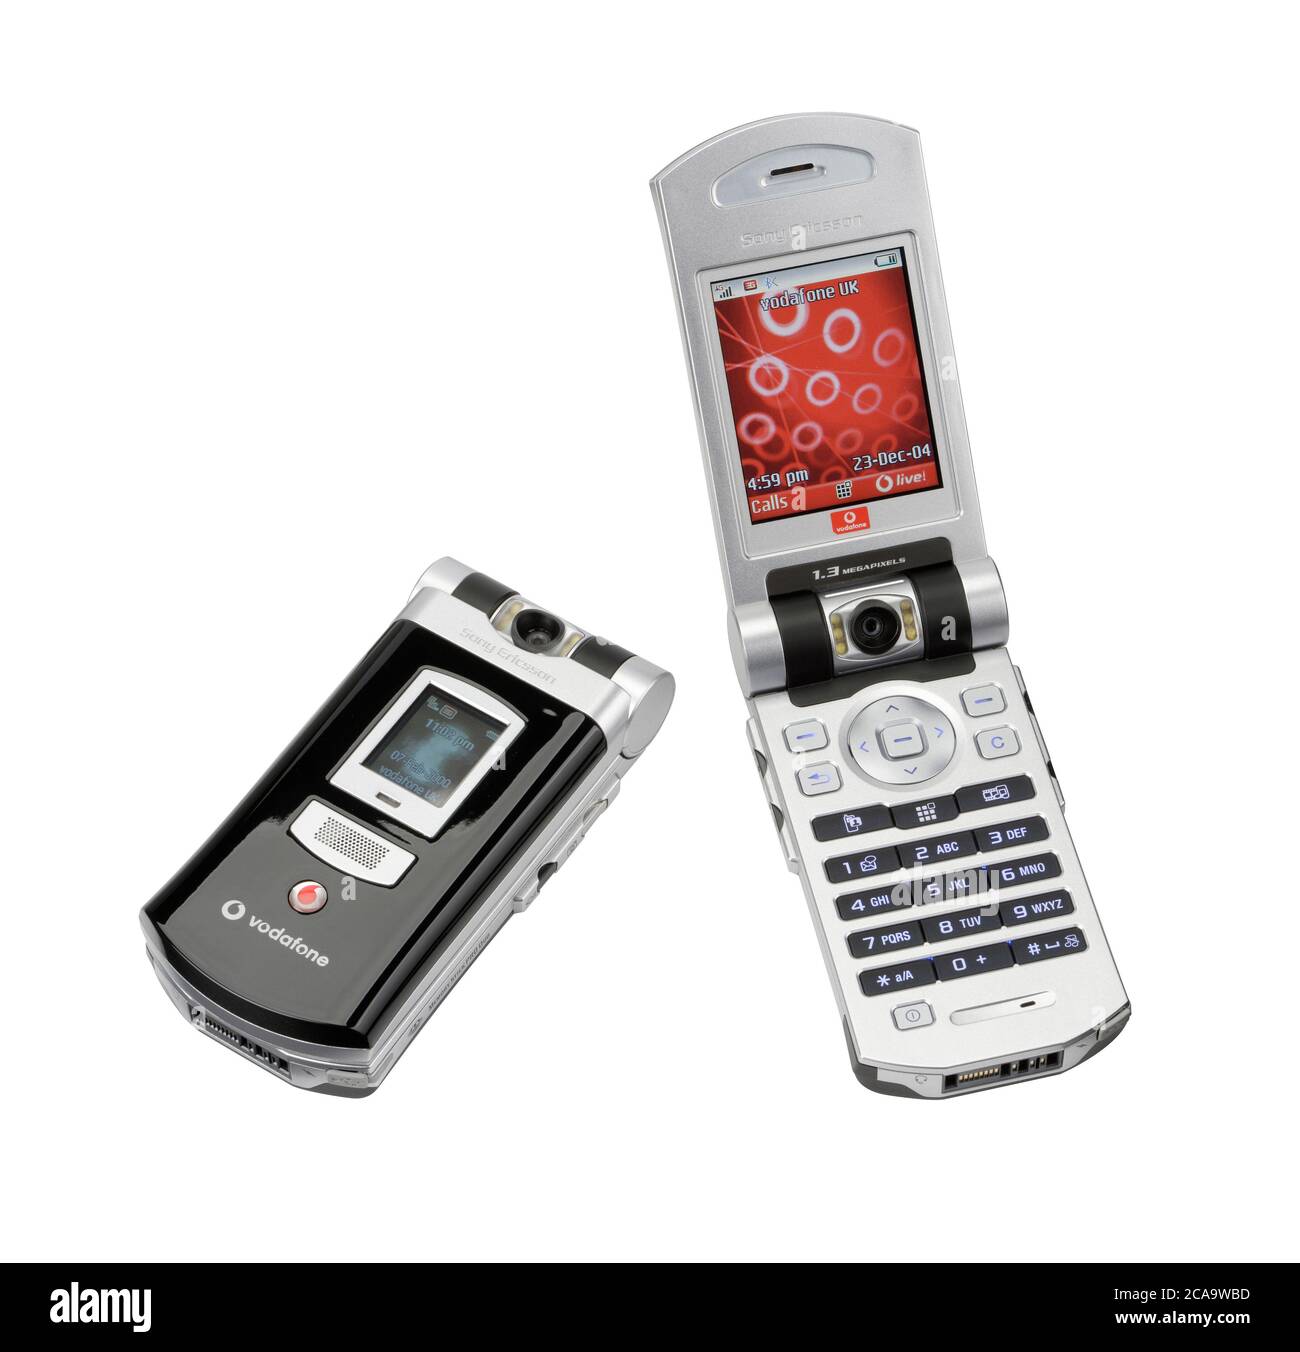 a-sony-ericsson-mobile-phone-from-year-2004-vodafone-tied-contract-telephone-that-has-a-flip-open-mechanism-2CA9WBD.jpg